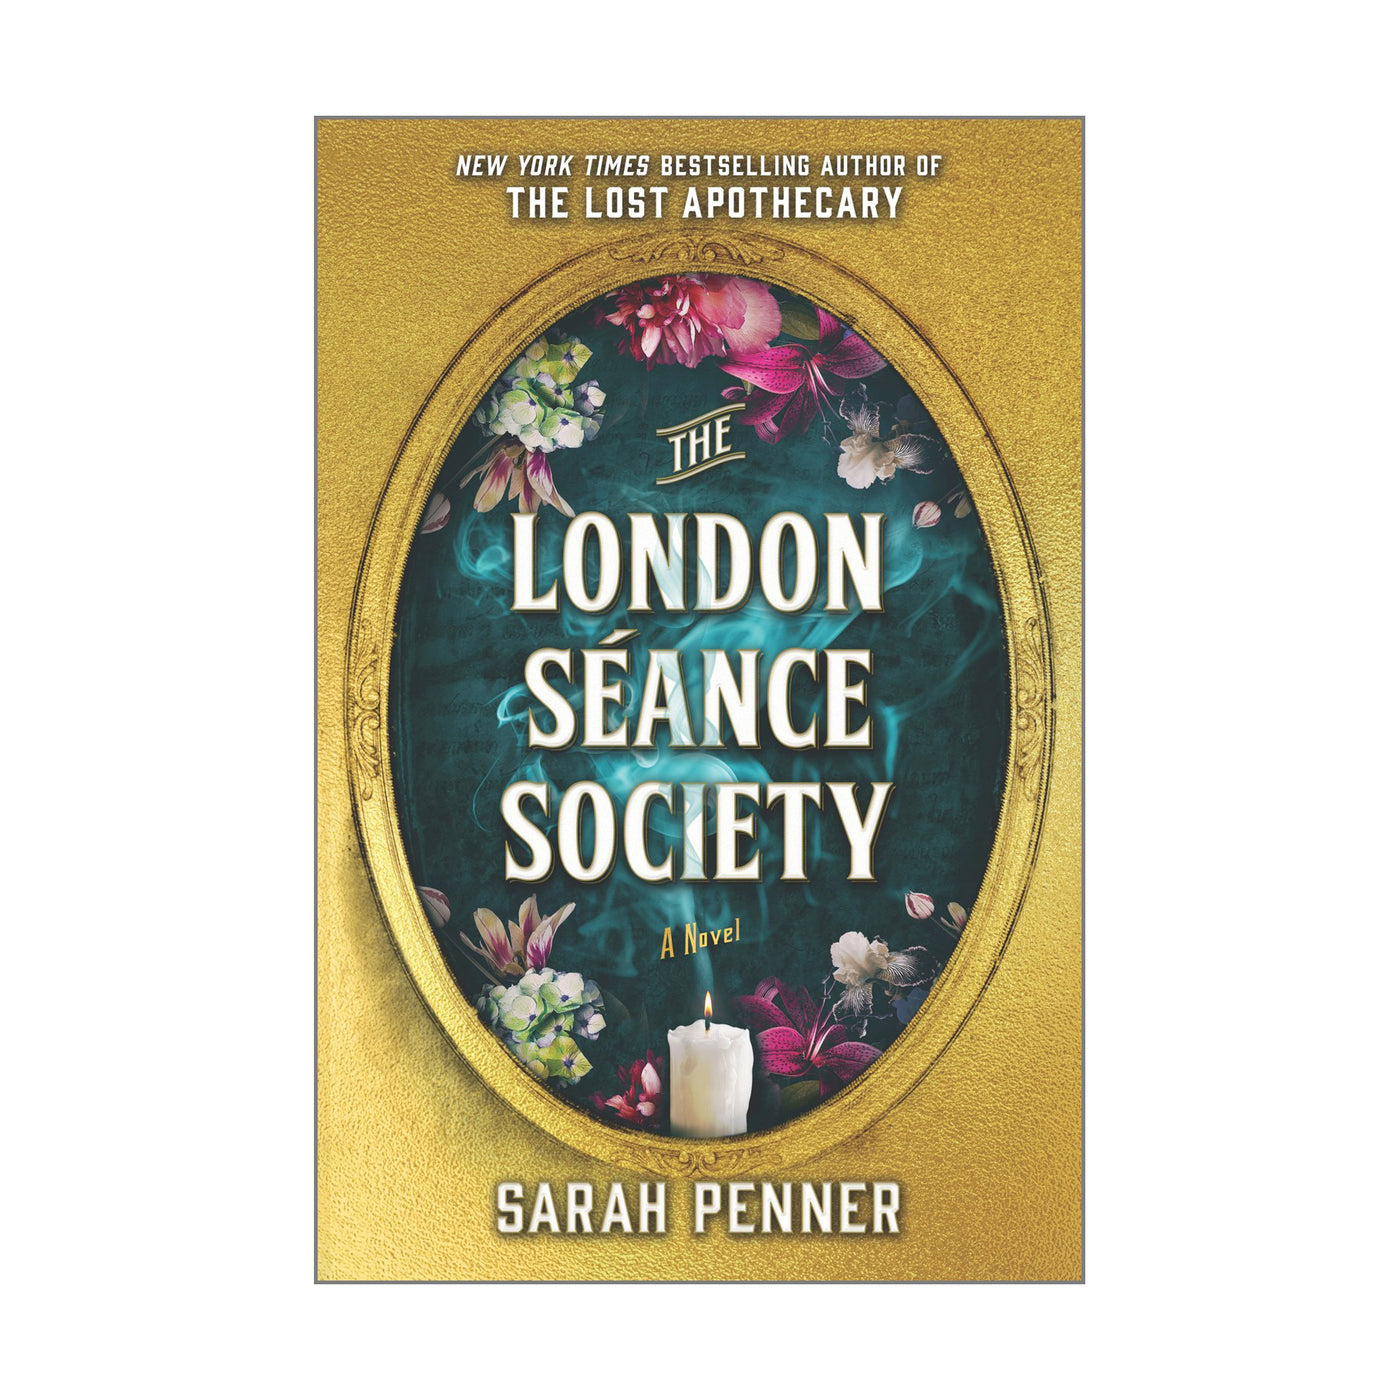 The London Seance Society - Signed